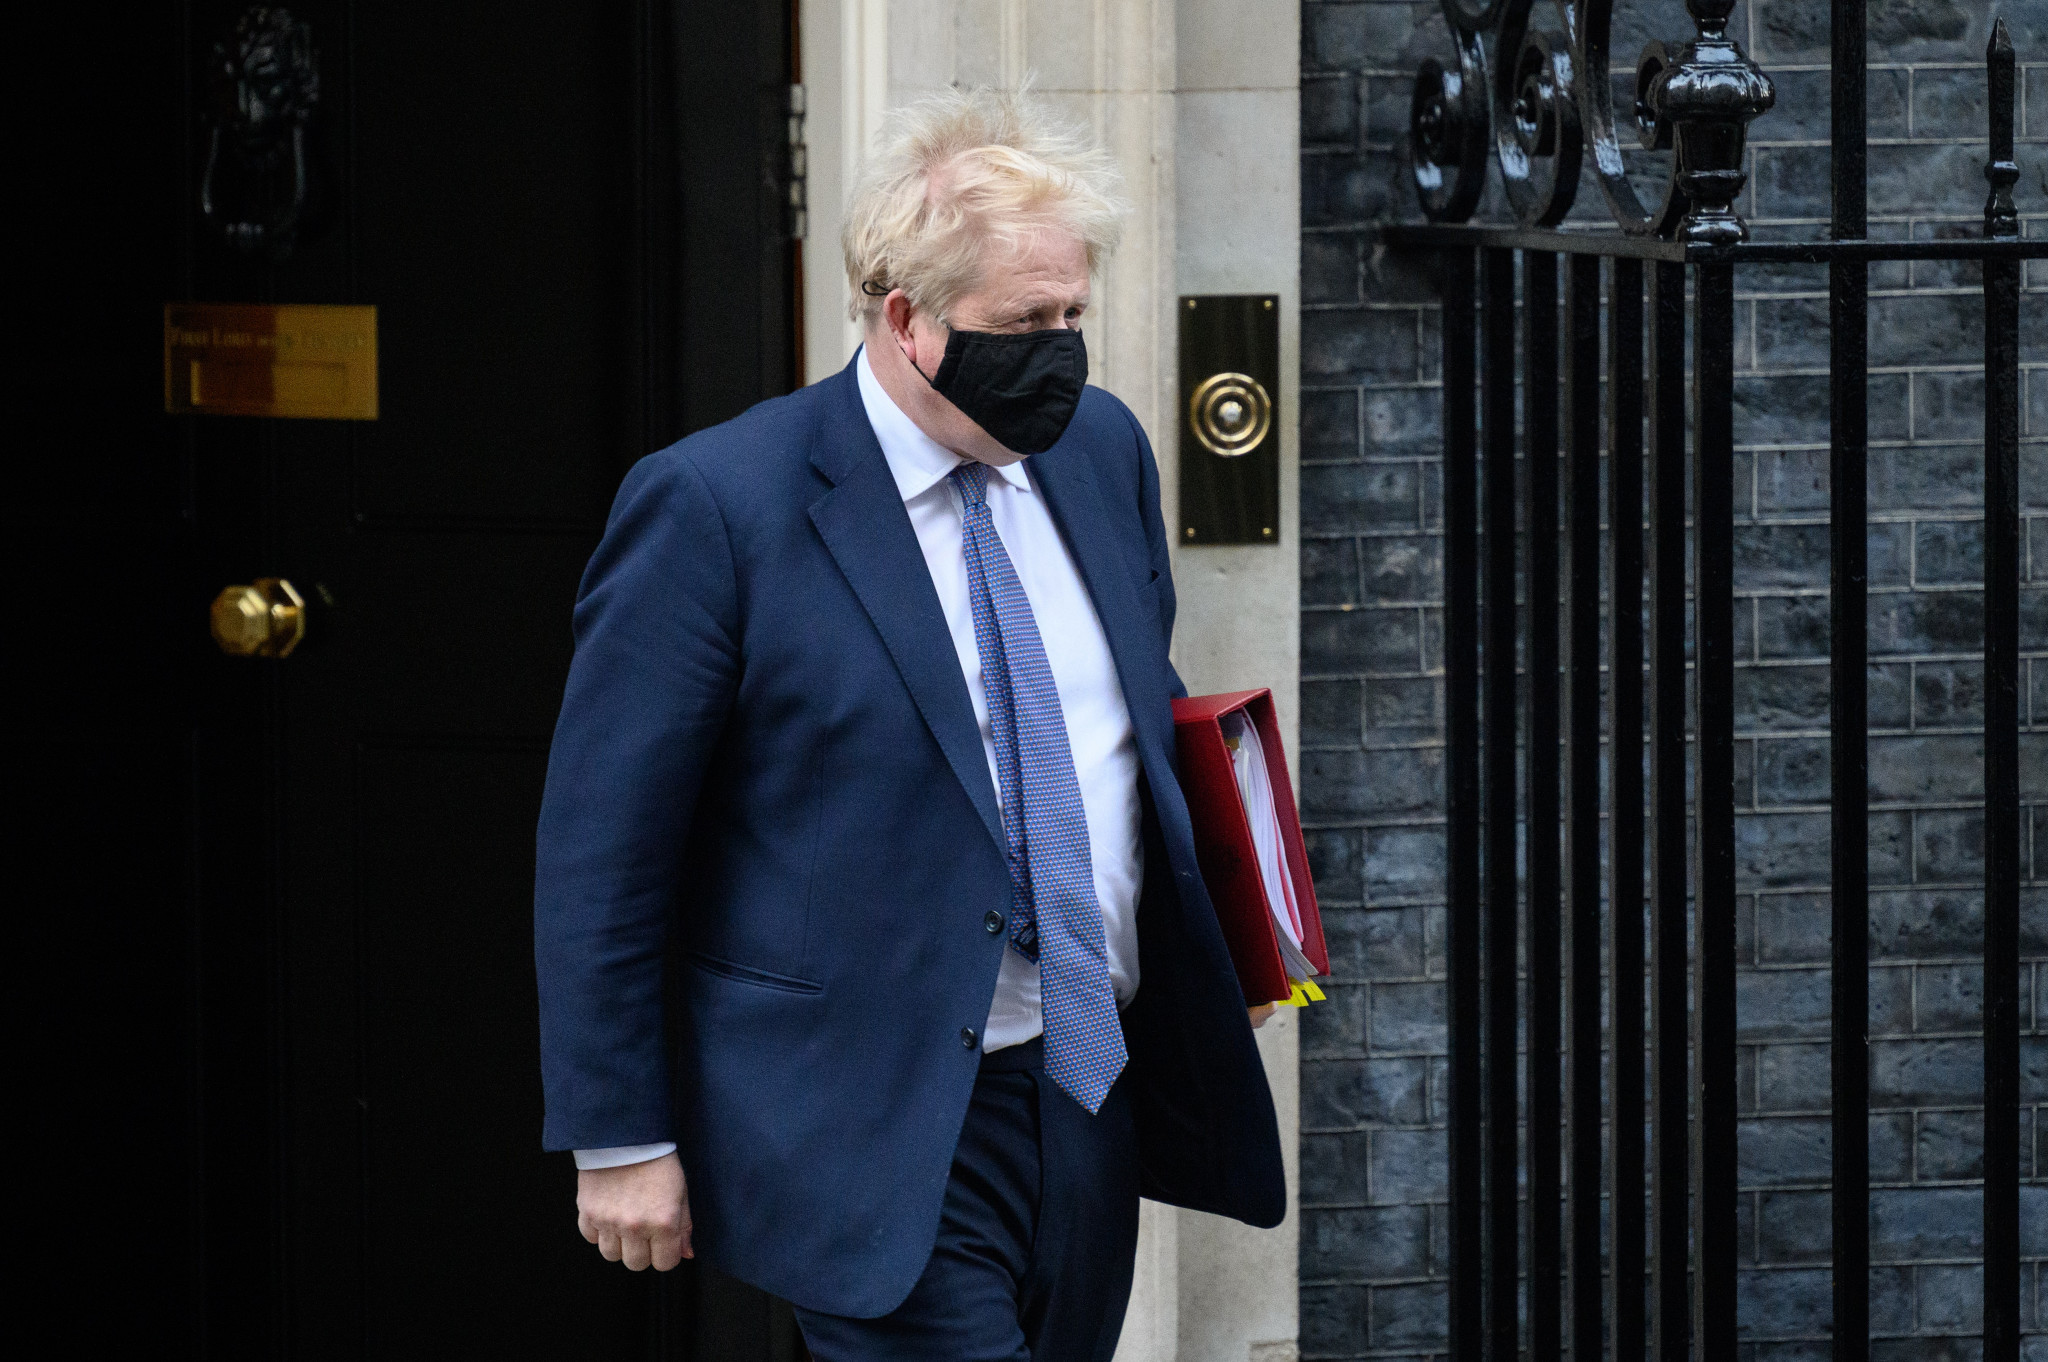 UK Prime Minister Boris Johnson felt a home nation bid for the 2030 World Cup was 